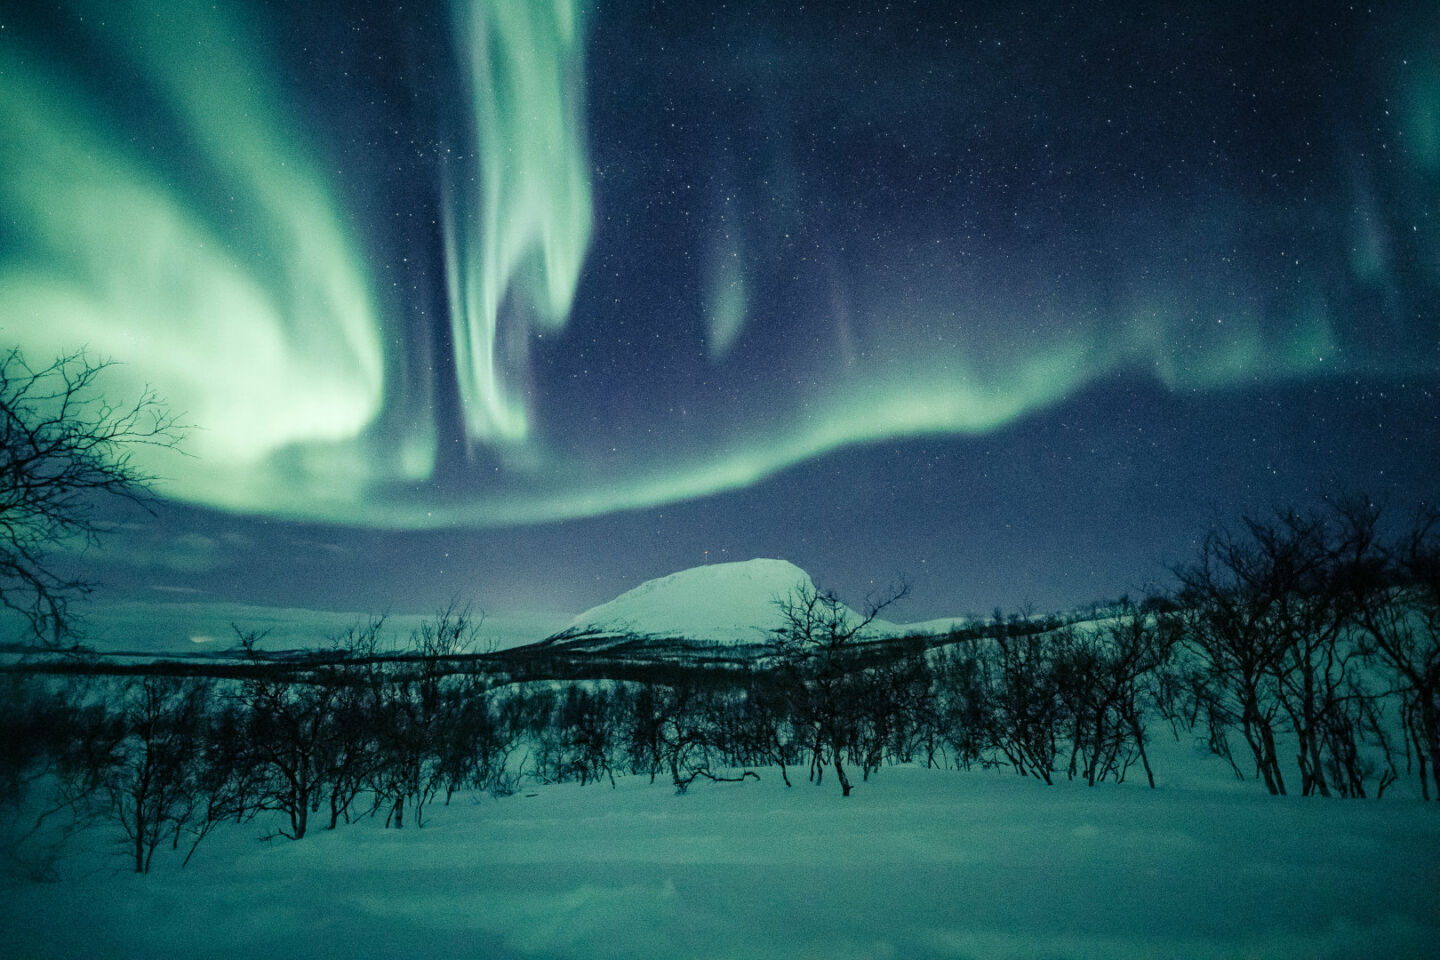 Guaranteed auroras, one of the many reasons to get a job in Finnish Lapland